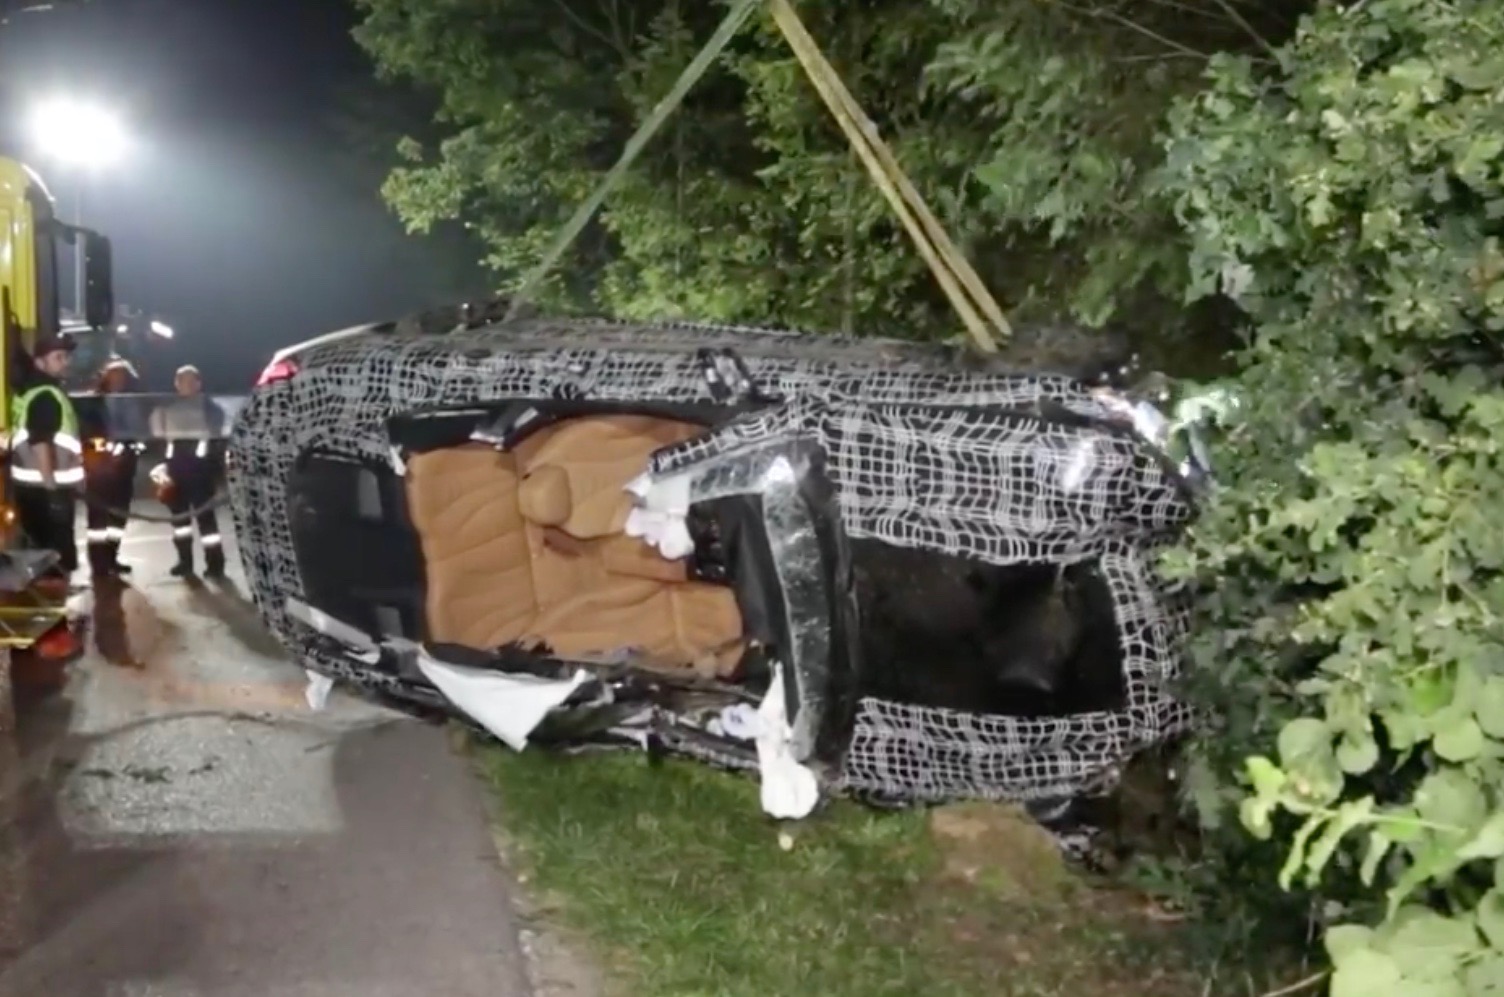 BMW 8 Series prototype involved in serious crash (video)